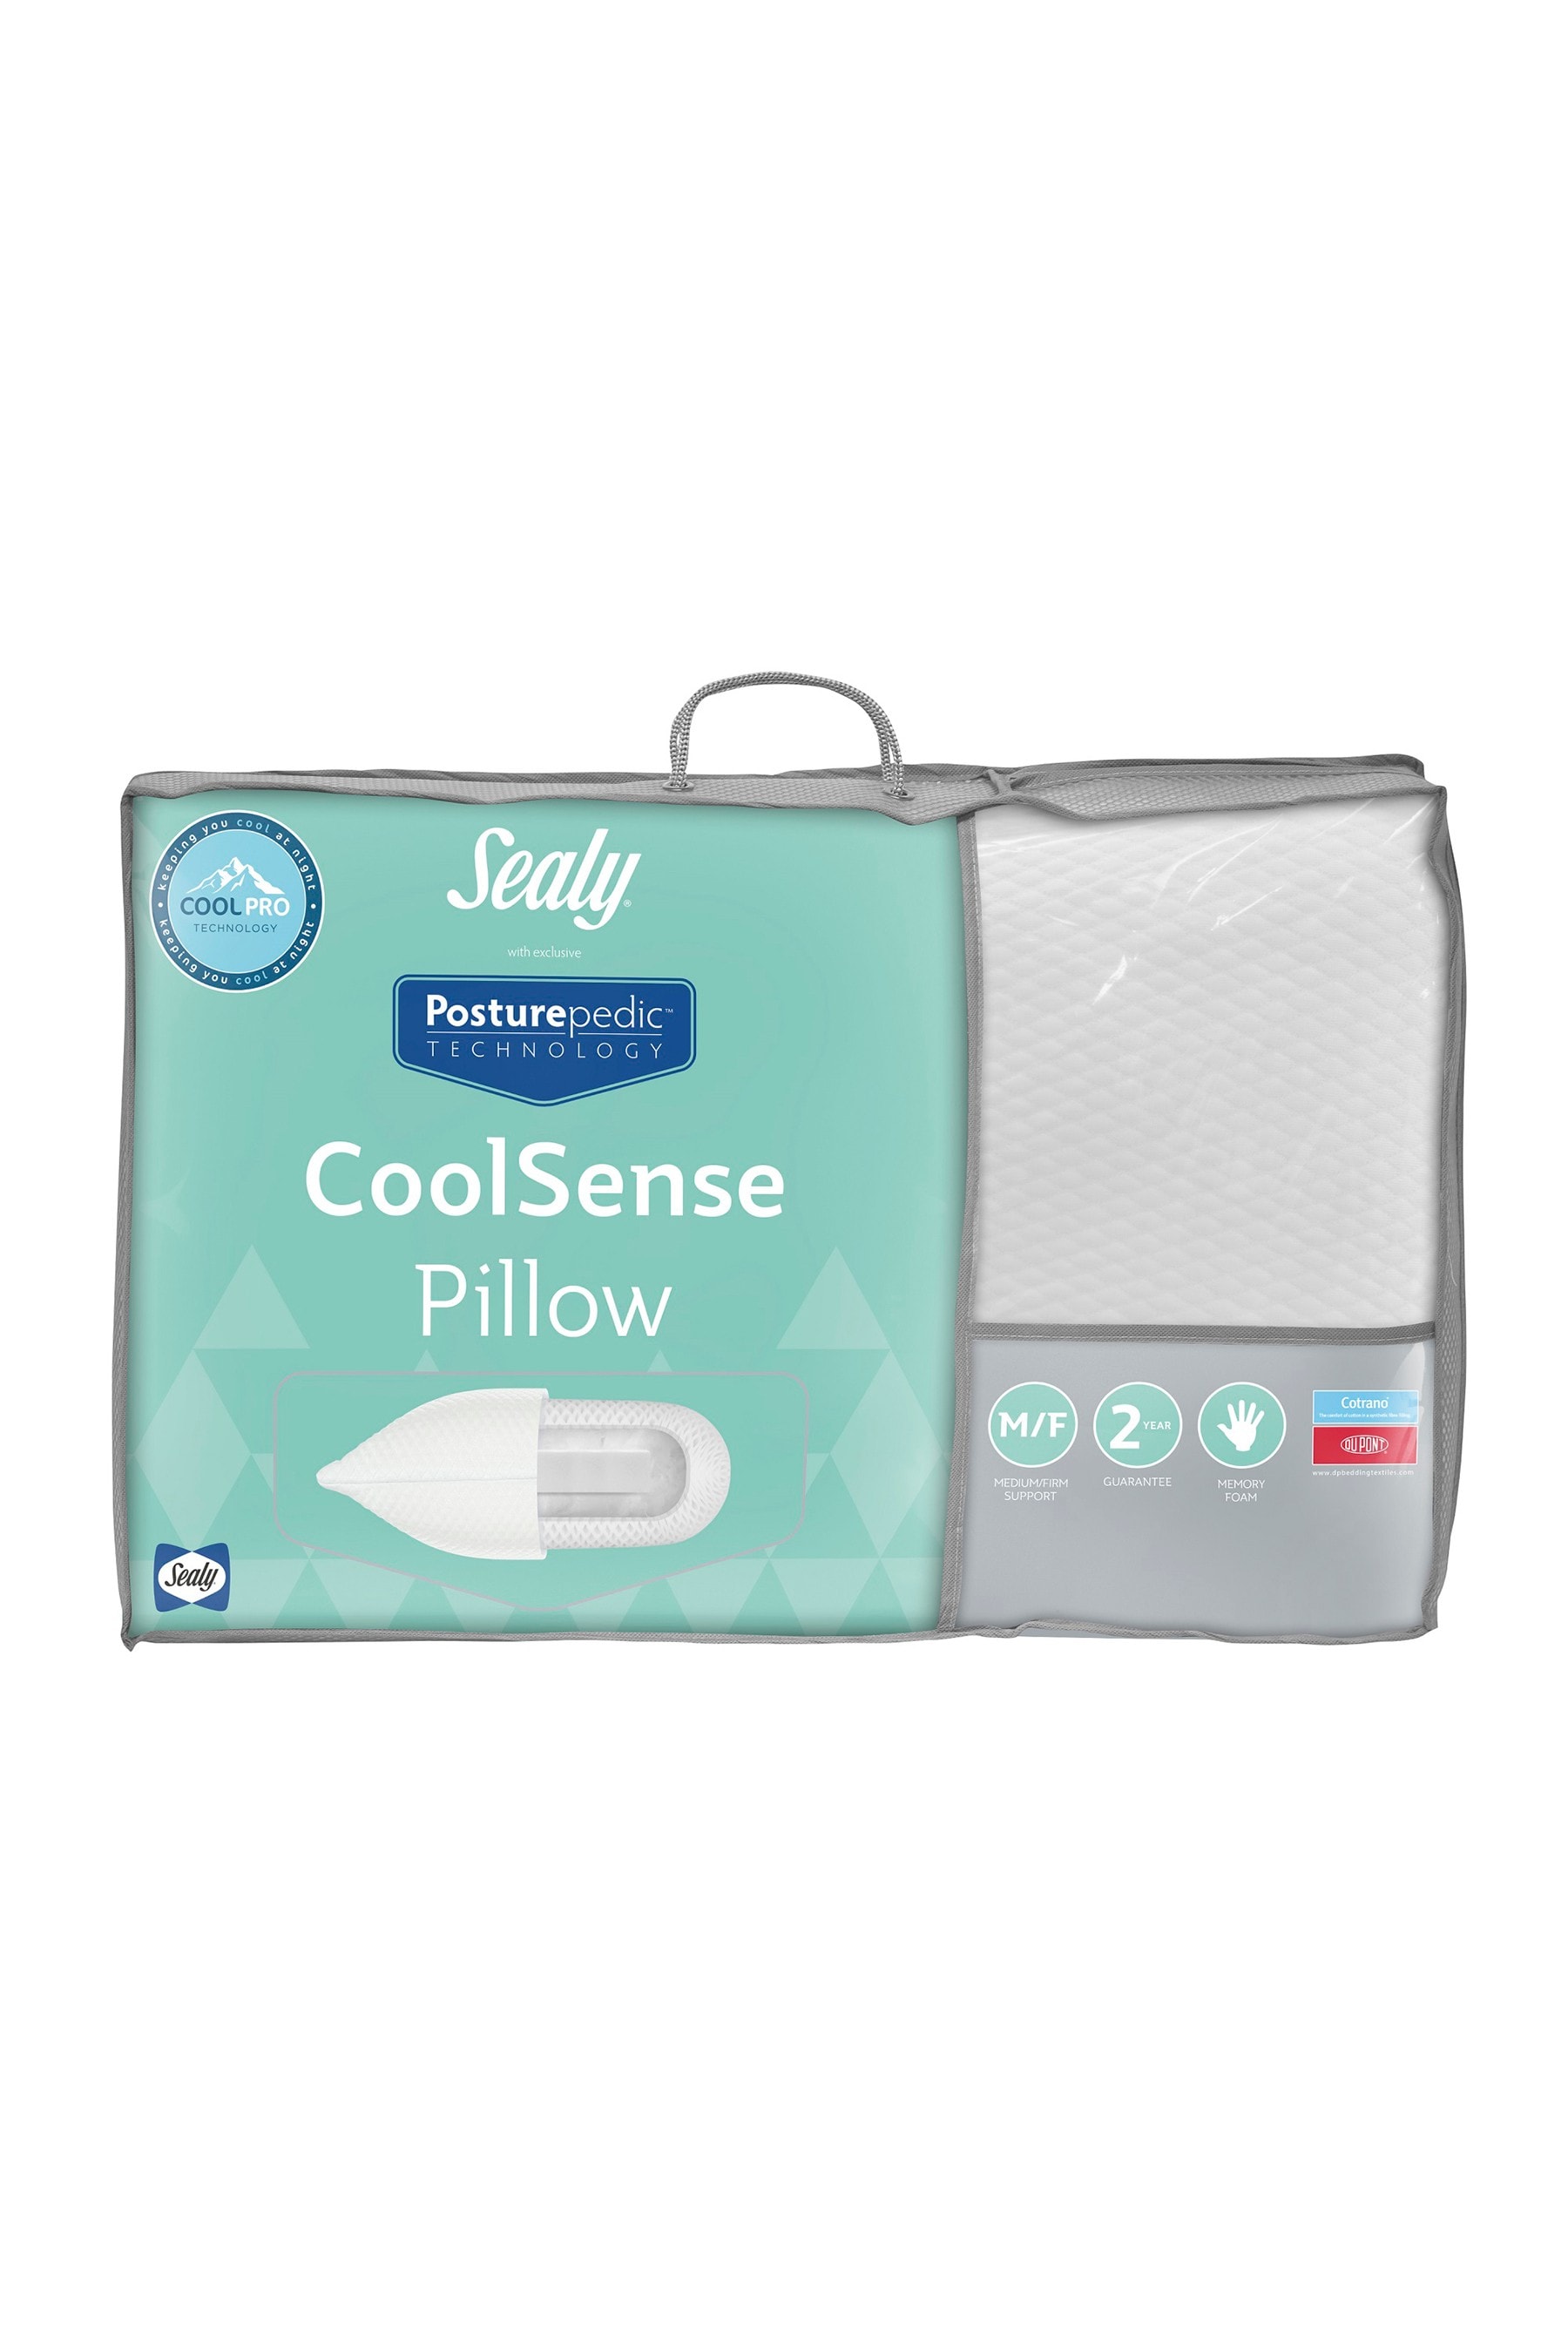 Buy Posturpedic Coolsense Pillow by Sealy from the Next UK online shop